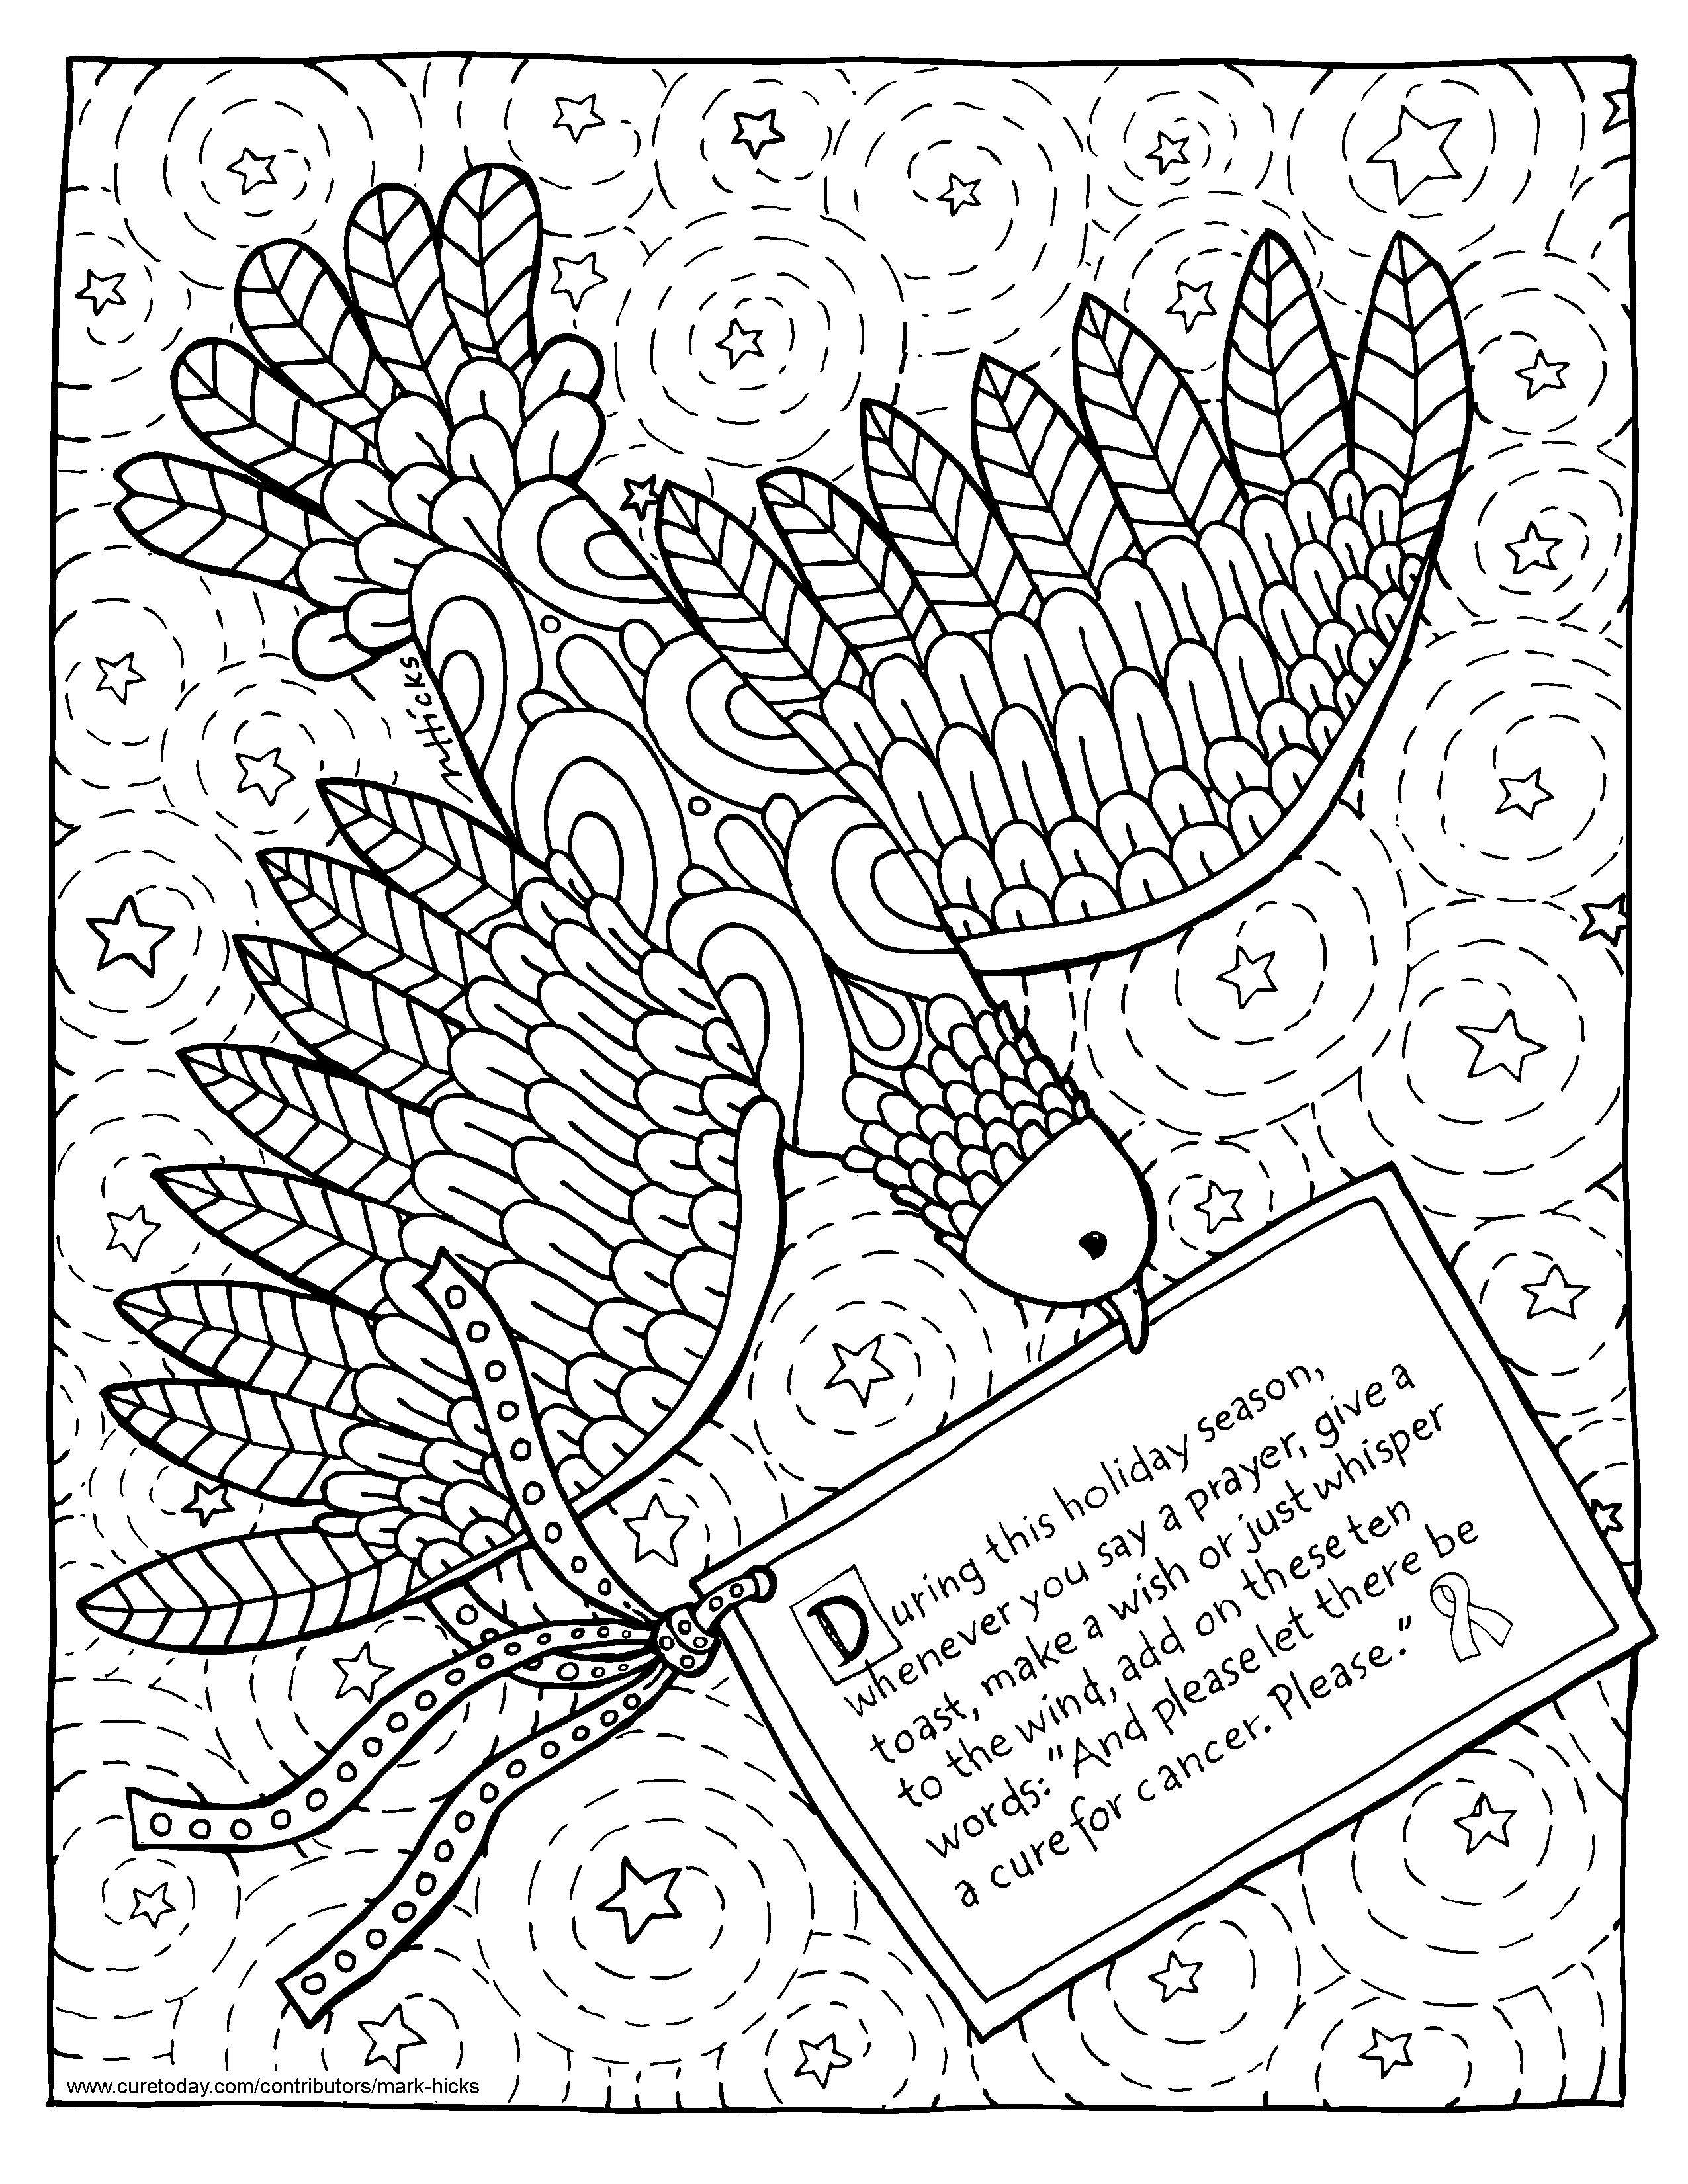 Coloring page of a bird holding a prayer for cancer survivors